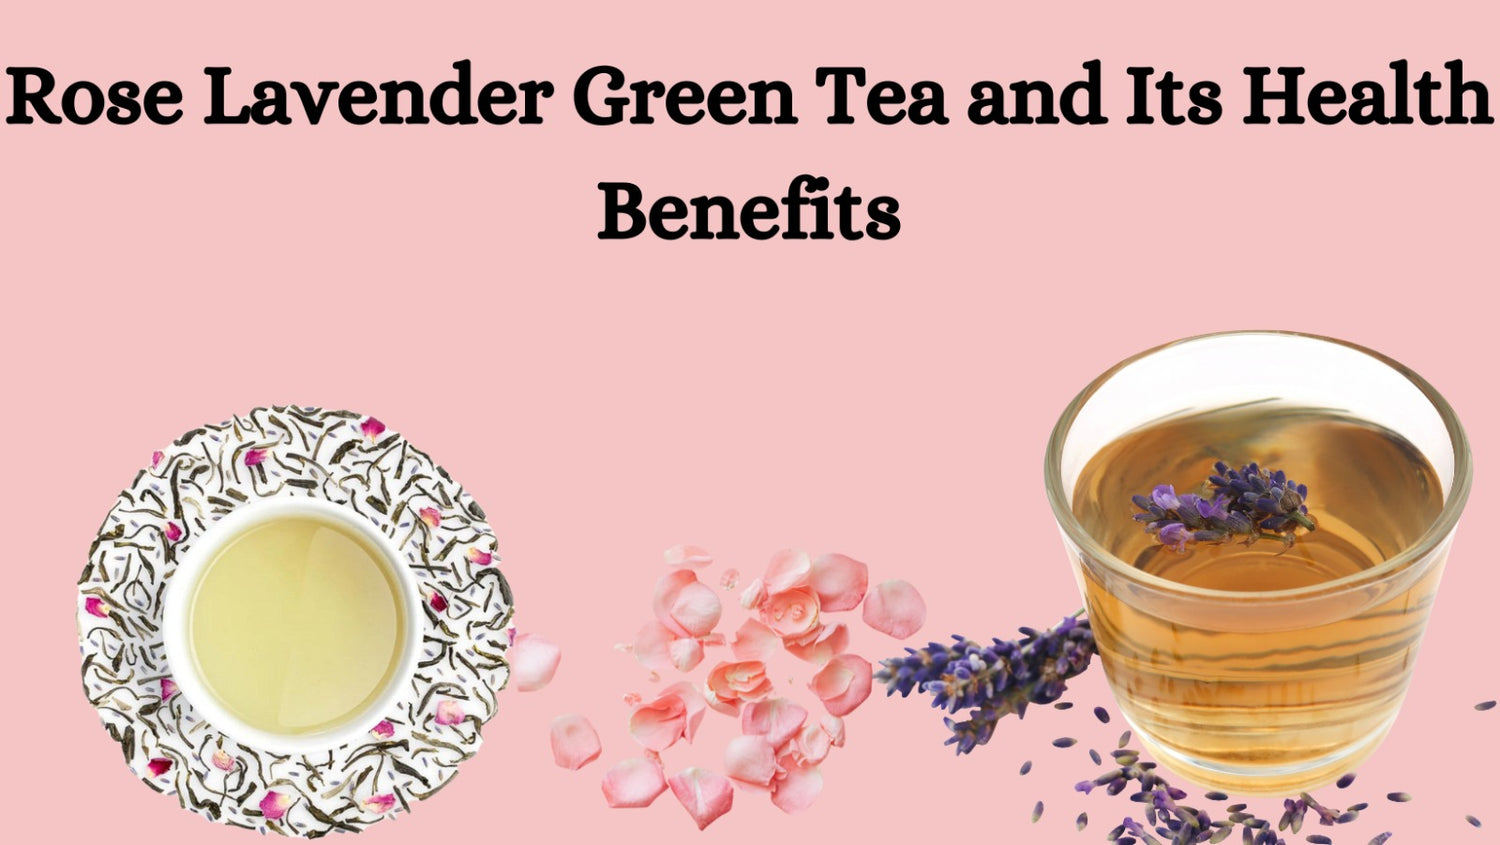 Rose Lavender Green Tea and Its Health Benefits